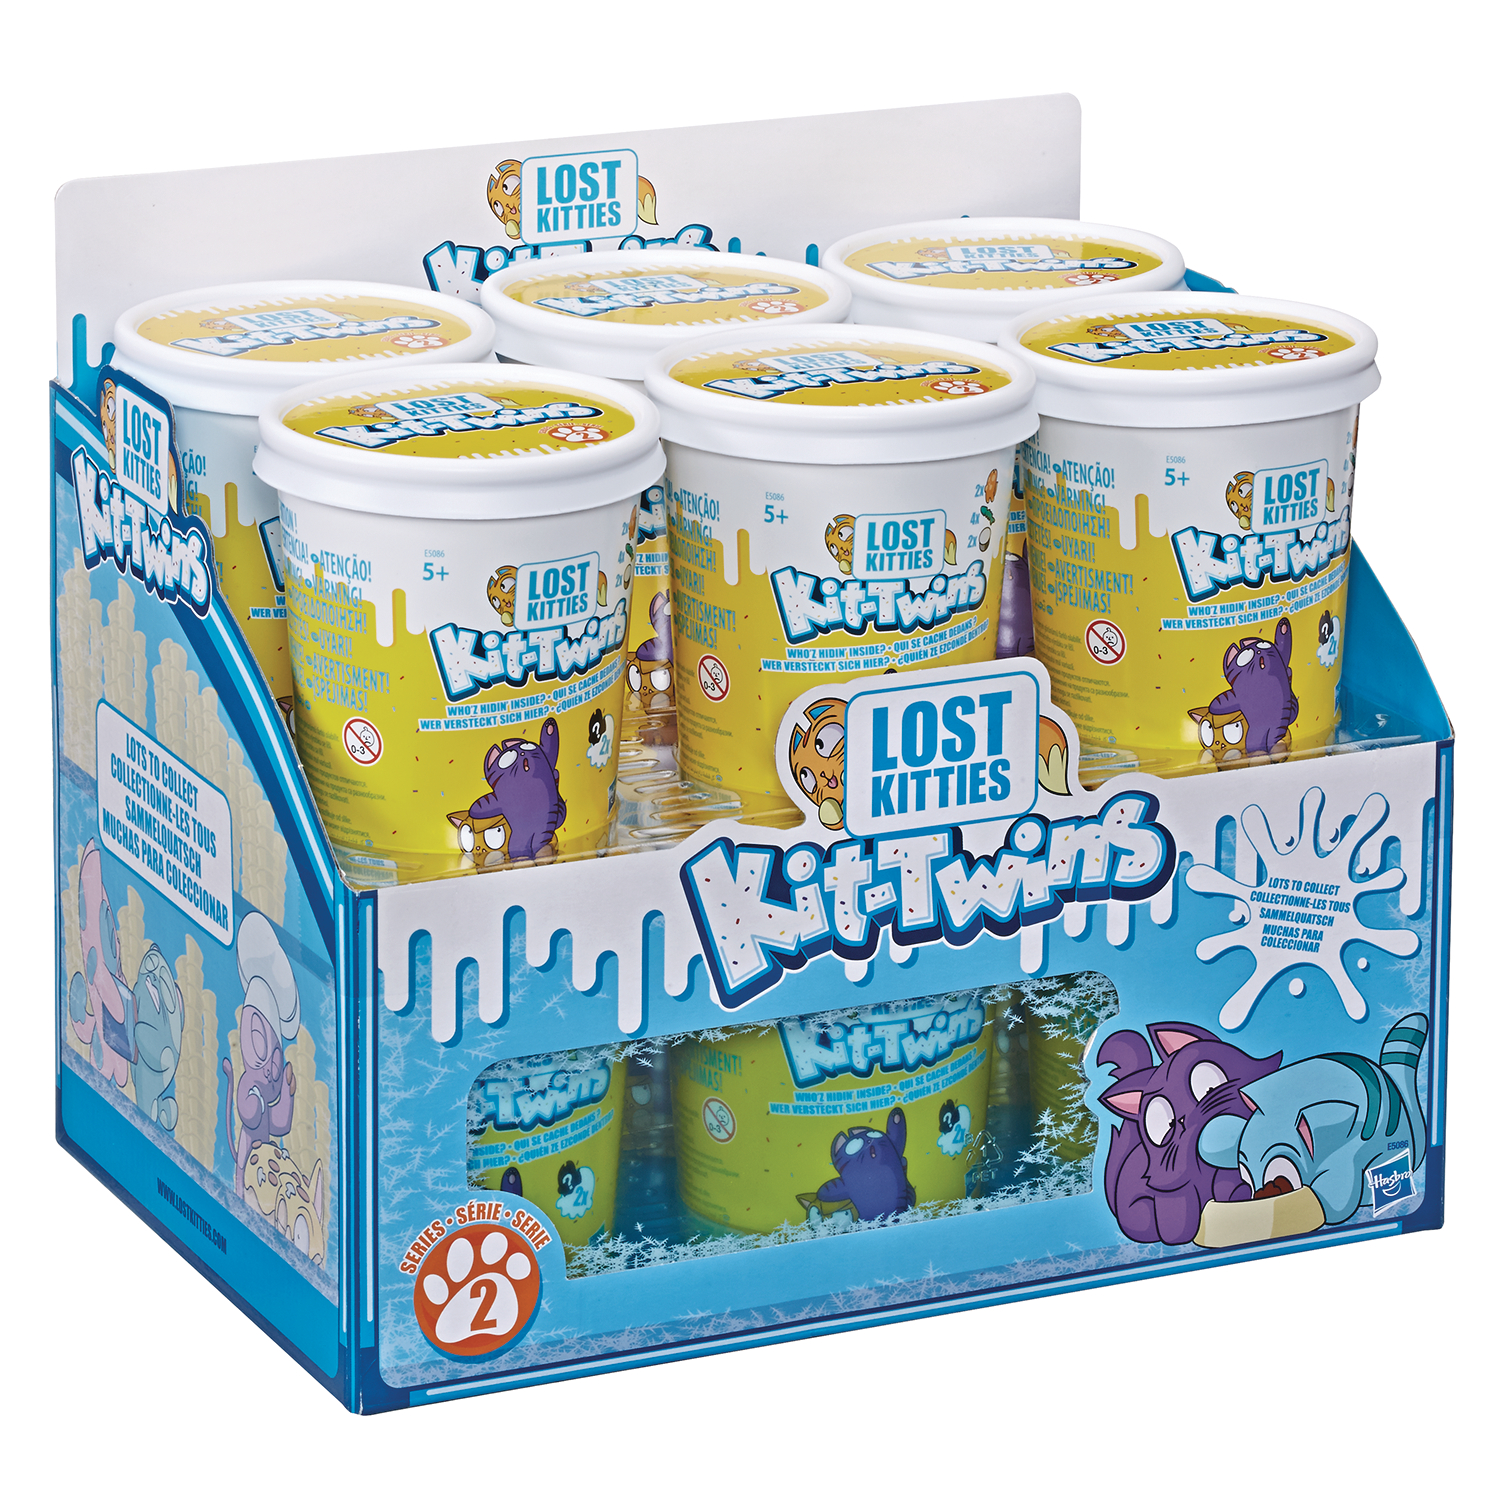  Lost Kitties Kit-Twins Toy : Toys & Games